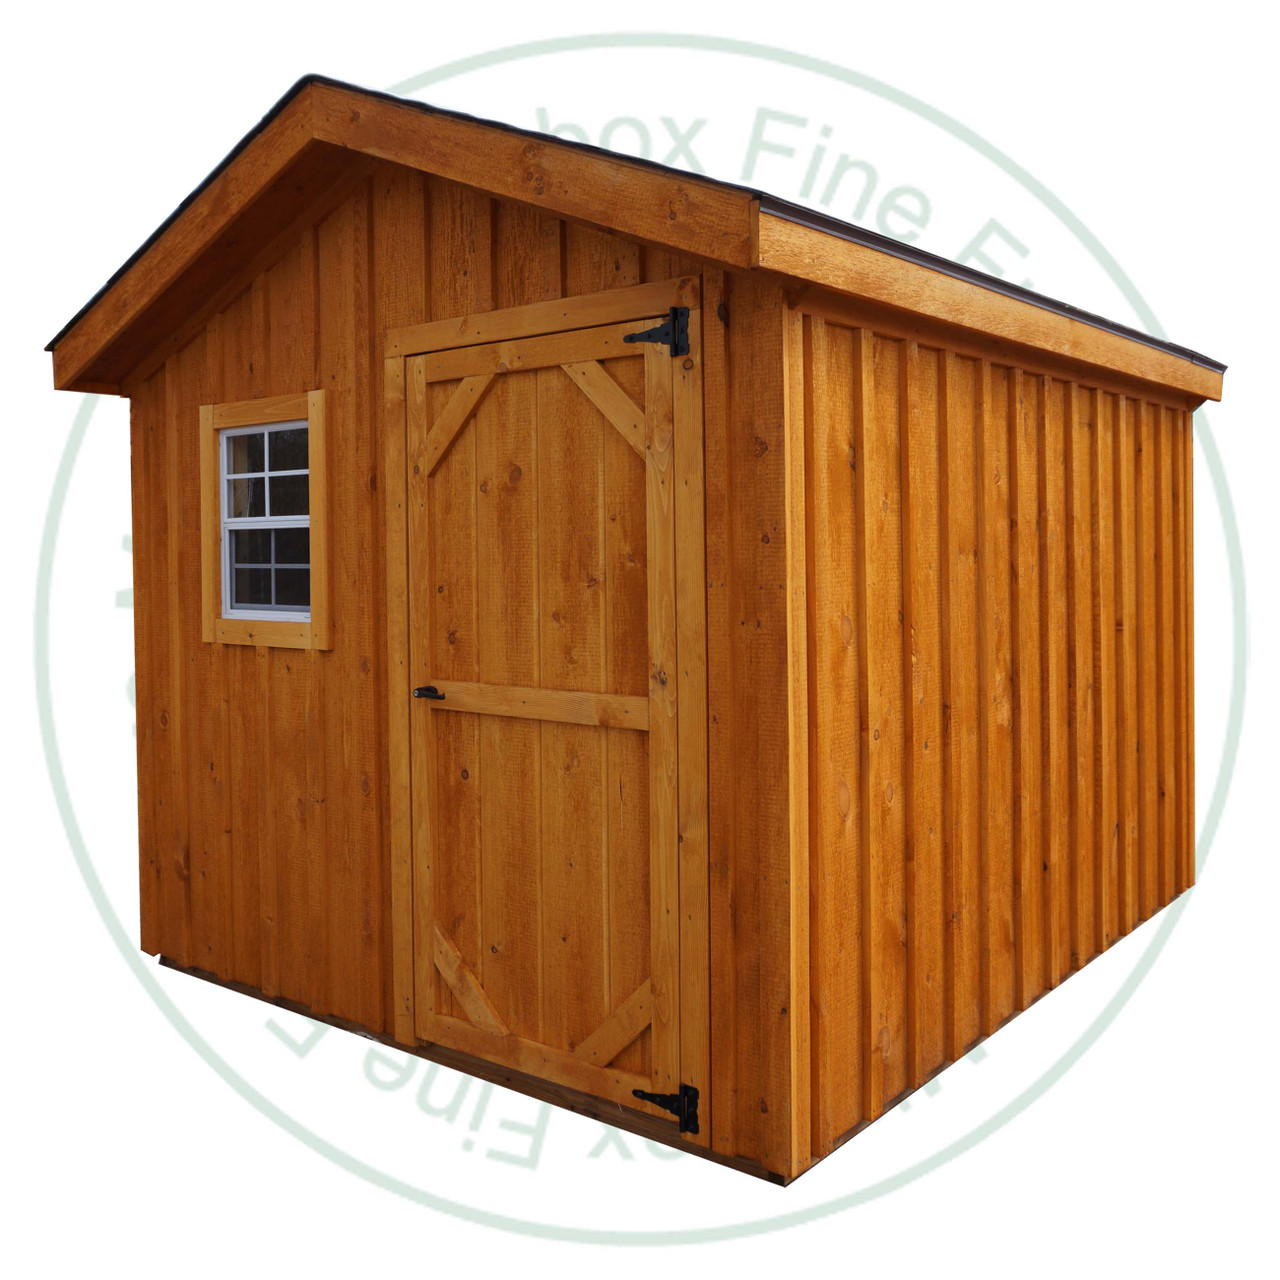 12'W x 14'D Garden Gable Storage Shed Stained And Assembled On Site